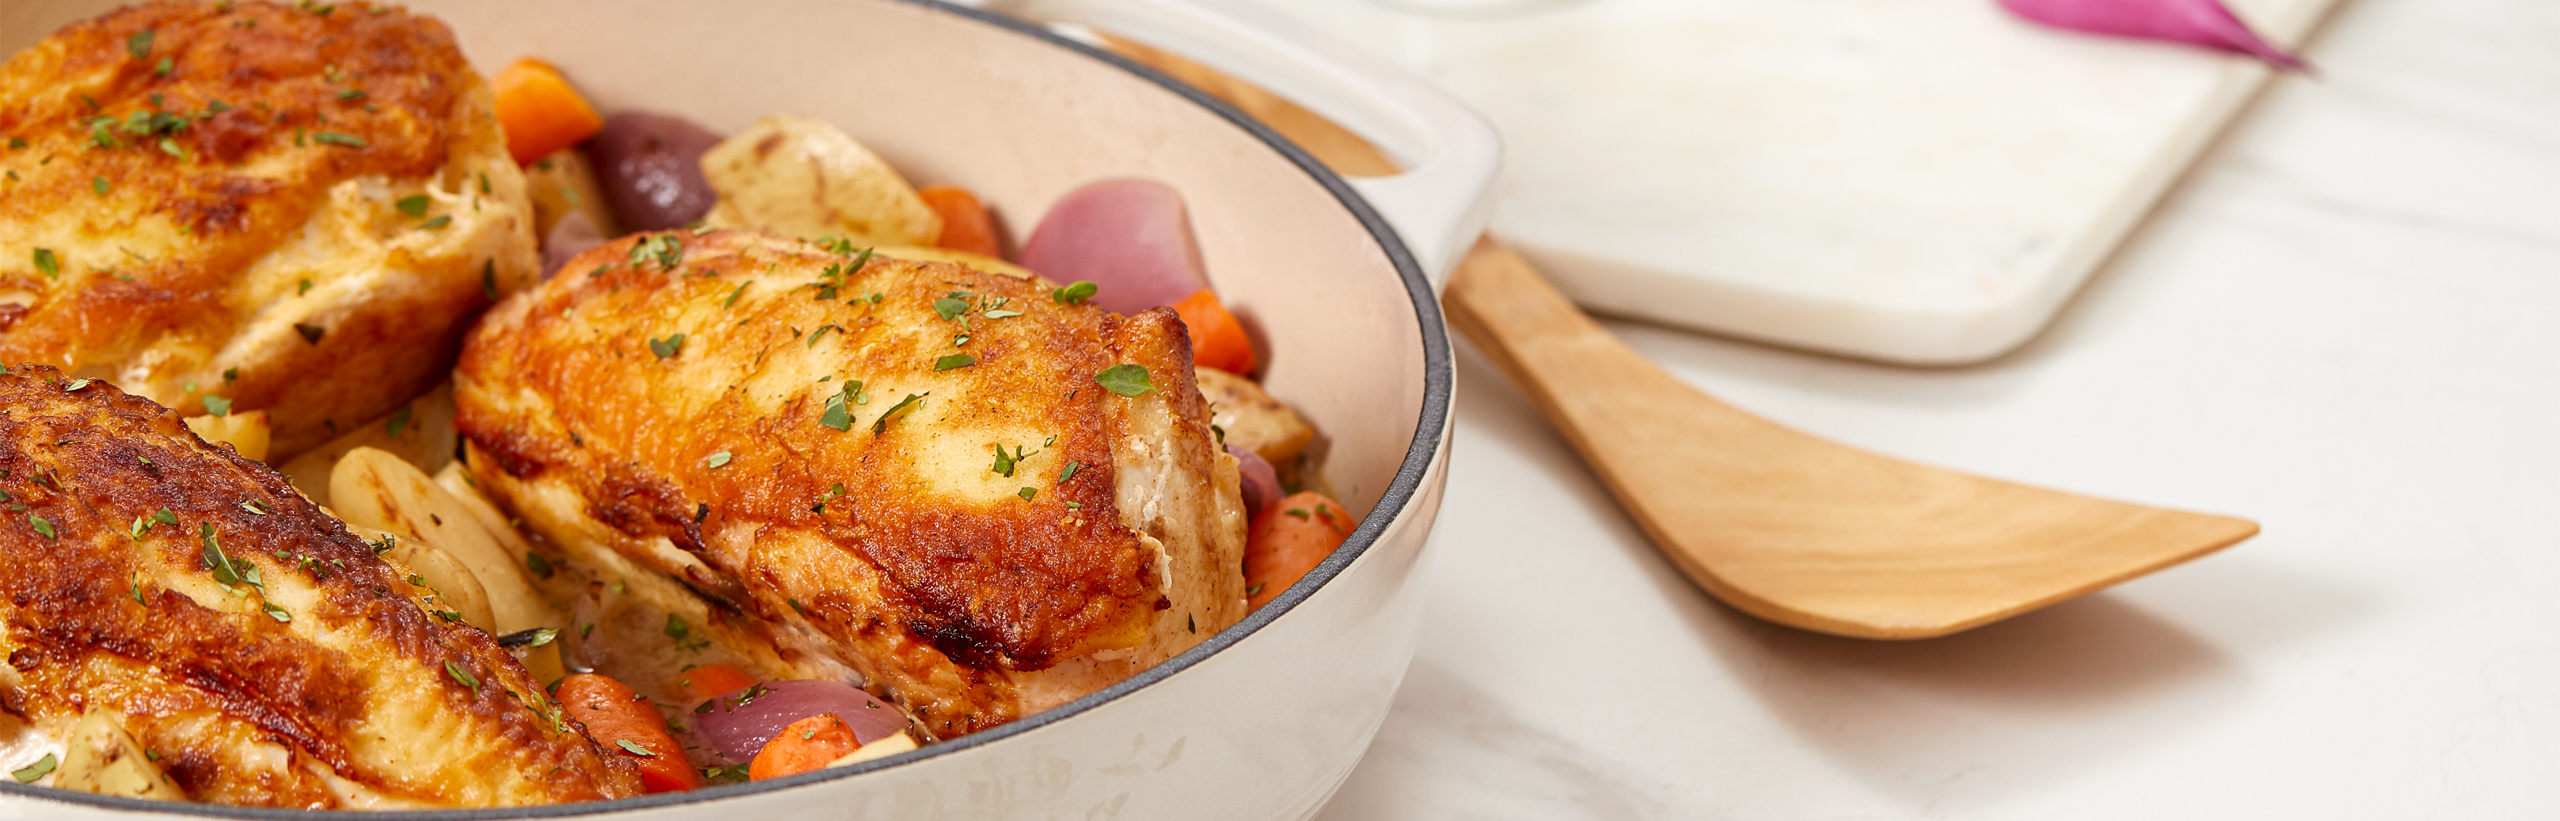 https://www.campbells.com/swanson/wp-content/uploads/2020/10/pan-roasted-chicken-with-vegetables-and-herbs.jpg